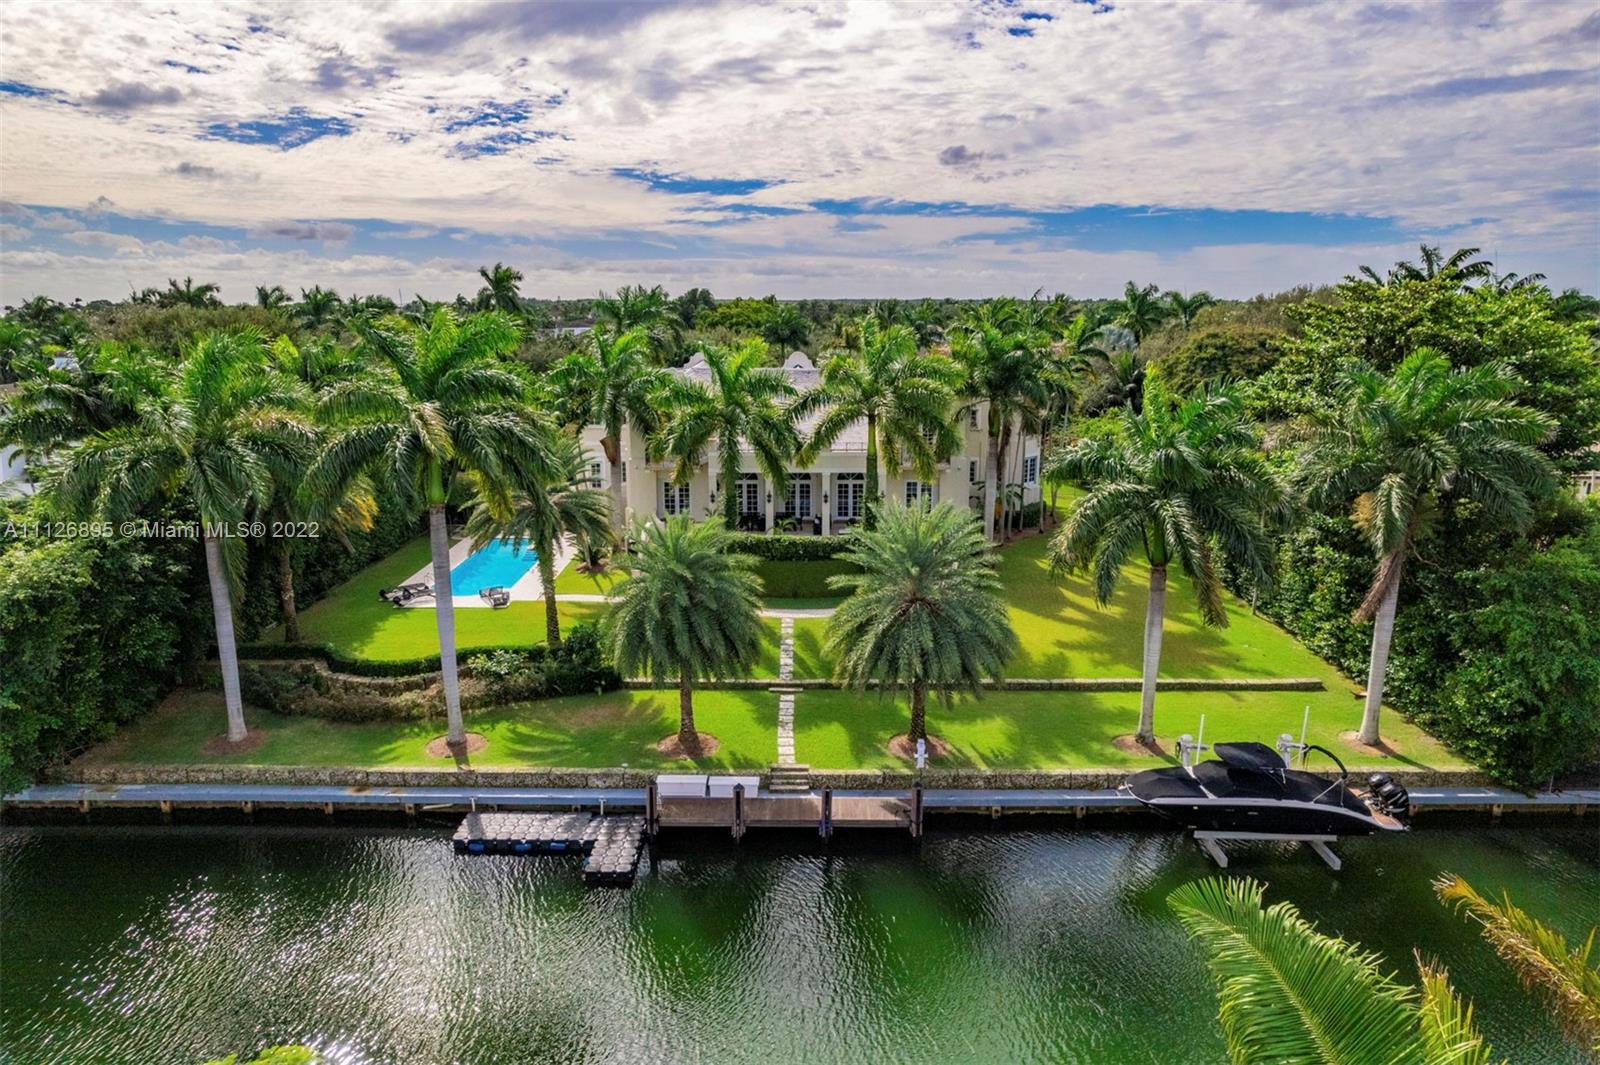 585 Arvida Parkway is a spectacular 12,102 Sq.Ft. waterfront residence on beautifully landscaped grounds in the prestigious community of Gables Estates. Featuring east and west wings, the exterior facade melds Dutch and Island influences. The elegant interiors include double height ceilings, stunning living and formal dining rooms, and chef's kitchen with Gaggenau appliances and breakfast area. The main suite has a luxurious marble bath with a long-mirrored vanity, jacuzzi and multi-jet shower, and two walk-in closets. Other special features include an elevator, family room, library, two fireplaces and 4-car garage. The resort-style outdoors have covered terraces, a pool and 180 feet of waterfront, with direct access and no bridges to Biscayne Bay.